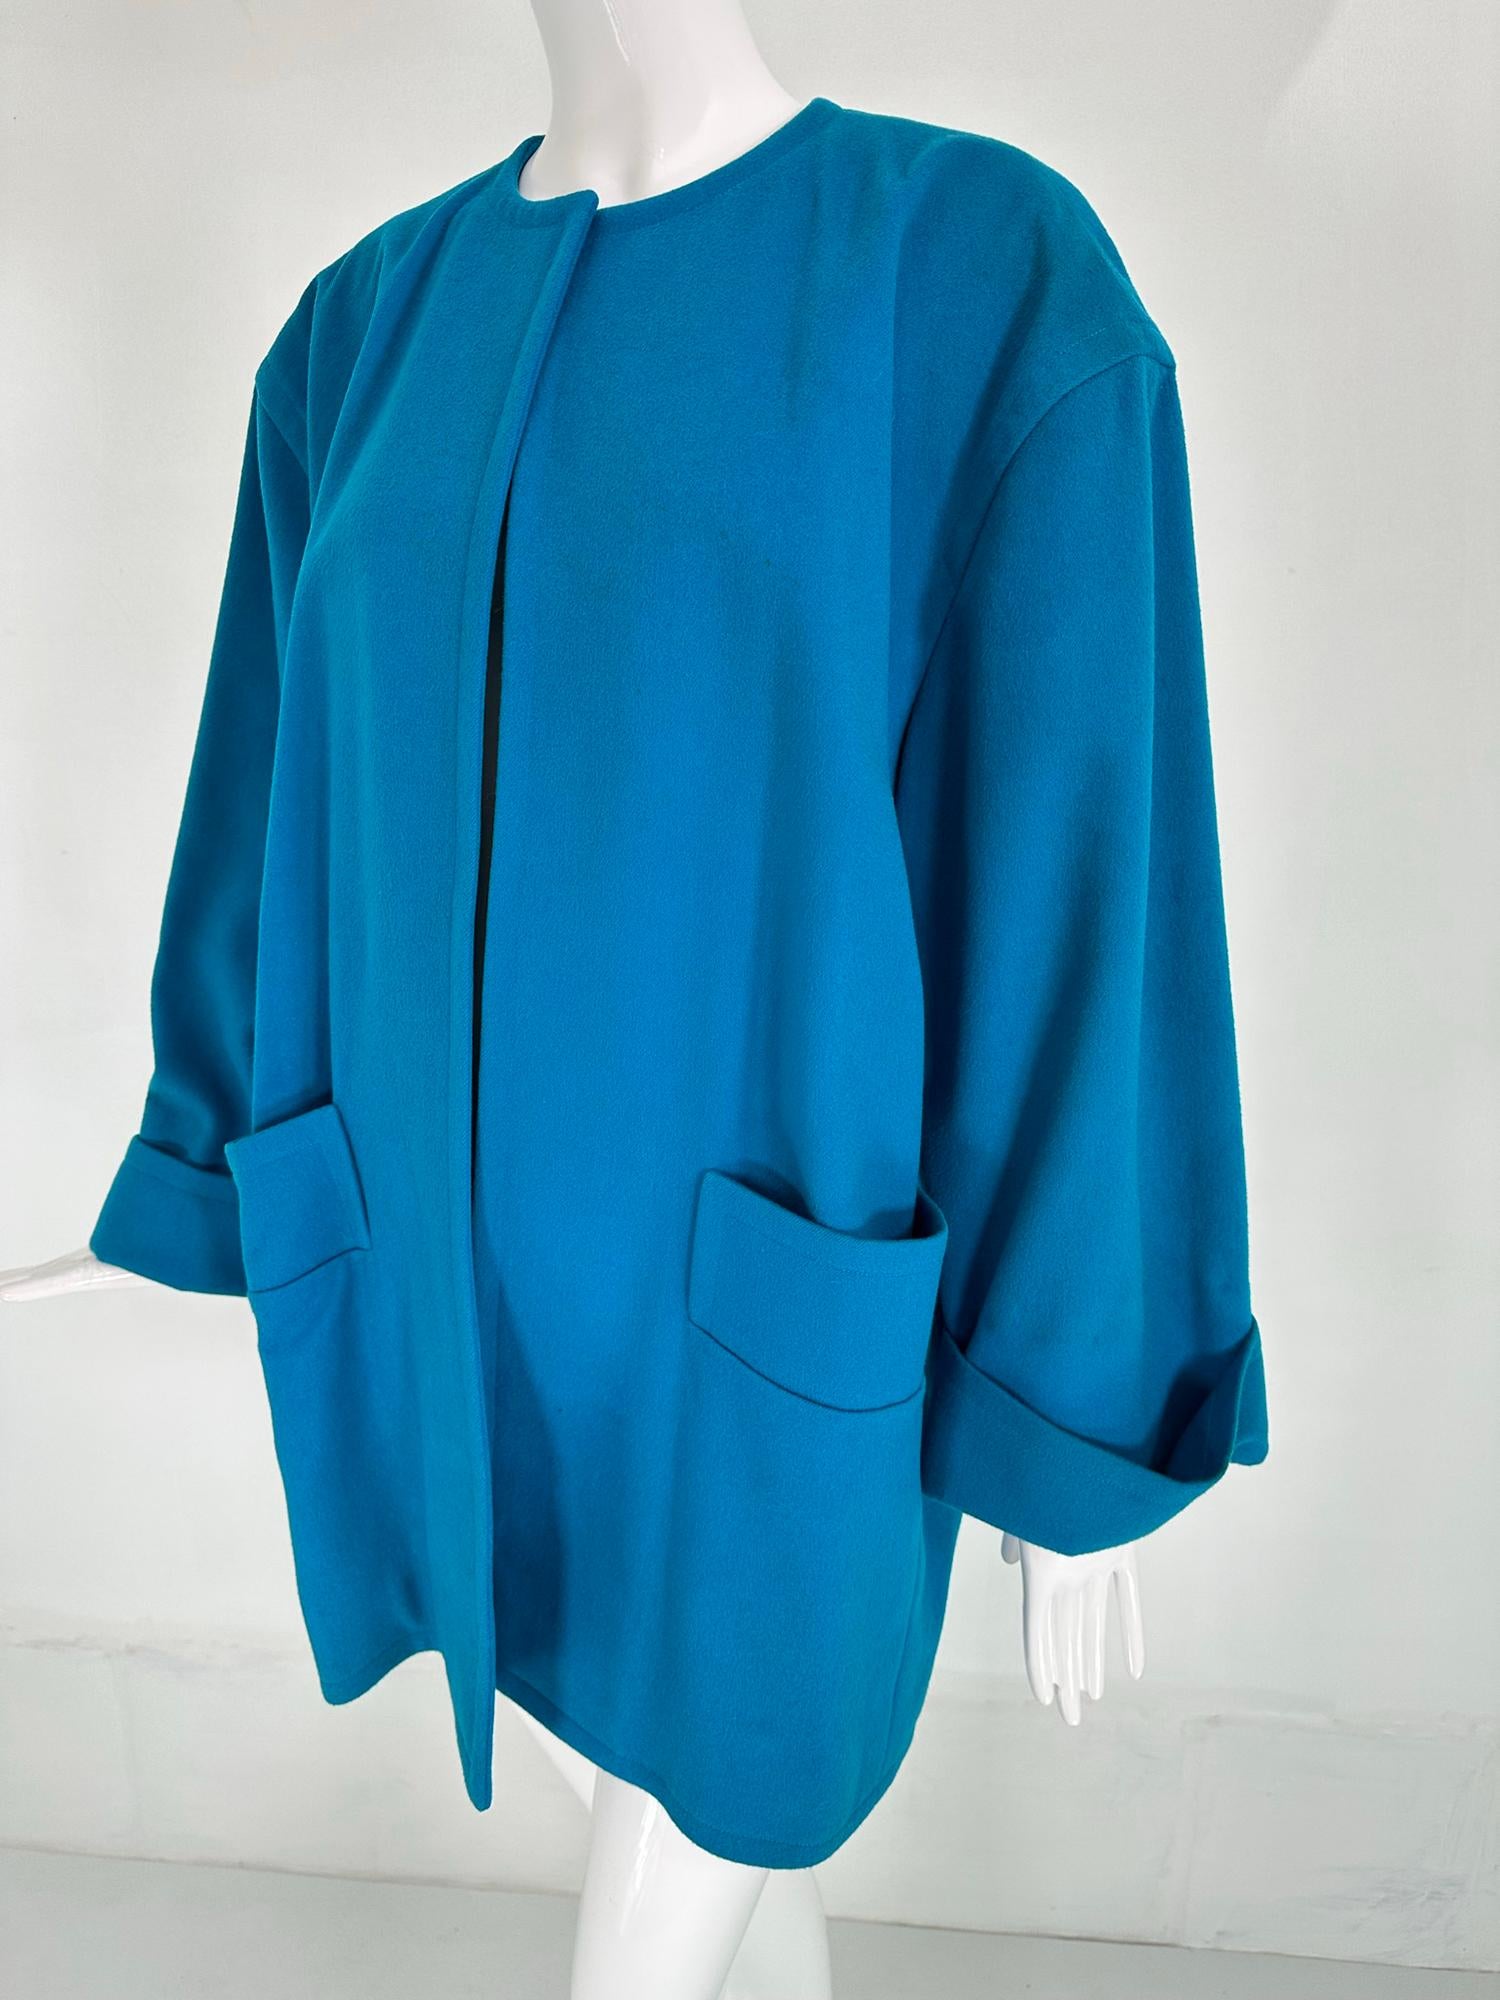 Givenchy Turquoise Wool Open Front Swing Coat with Angled Pockets 1980s For Sale 4